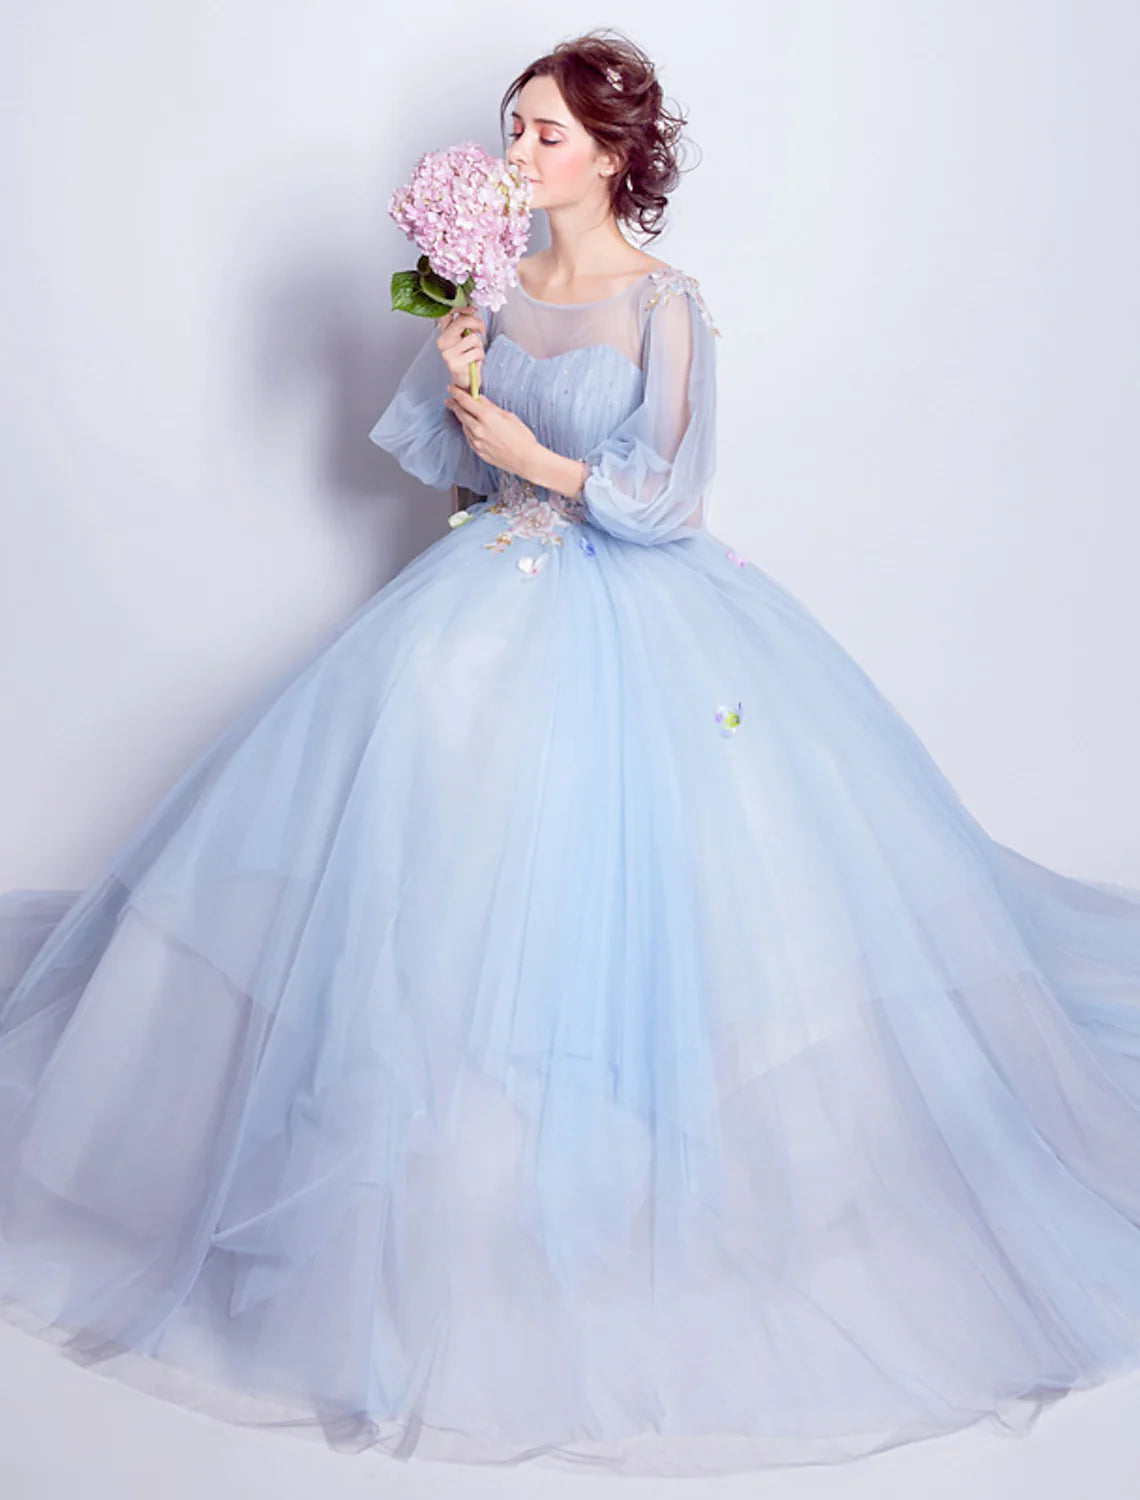 Ball Gown Elegant Floral Puffy Quinceanera Engagement Dress Illusion Neck 3/4 Length Sleeve Floor Length Tulle with Pleats Appliques